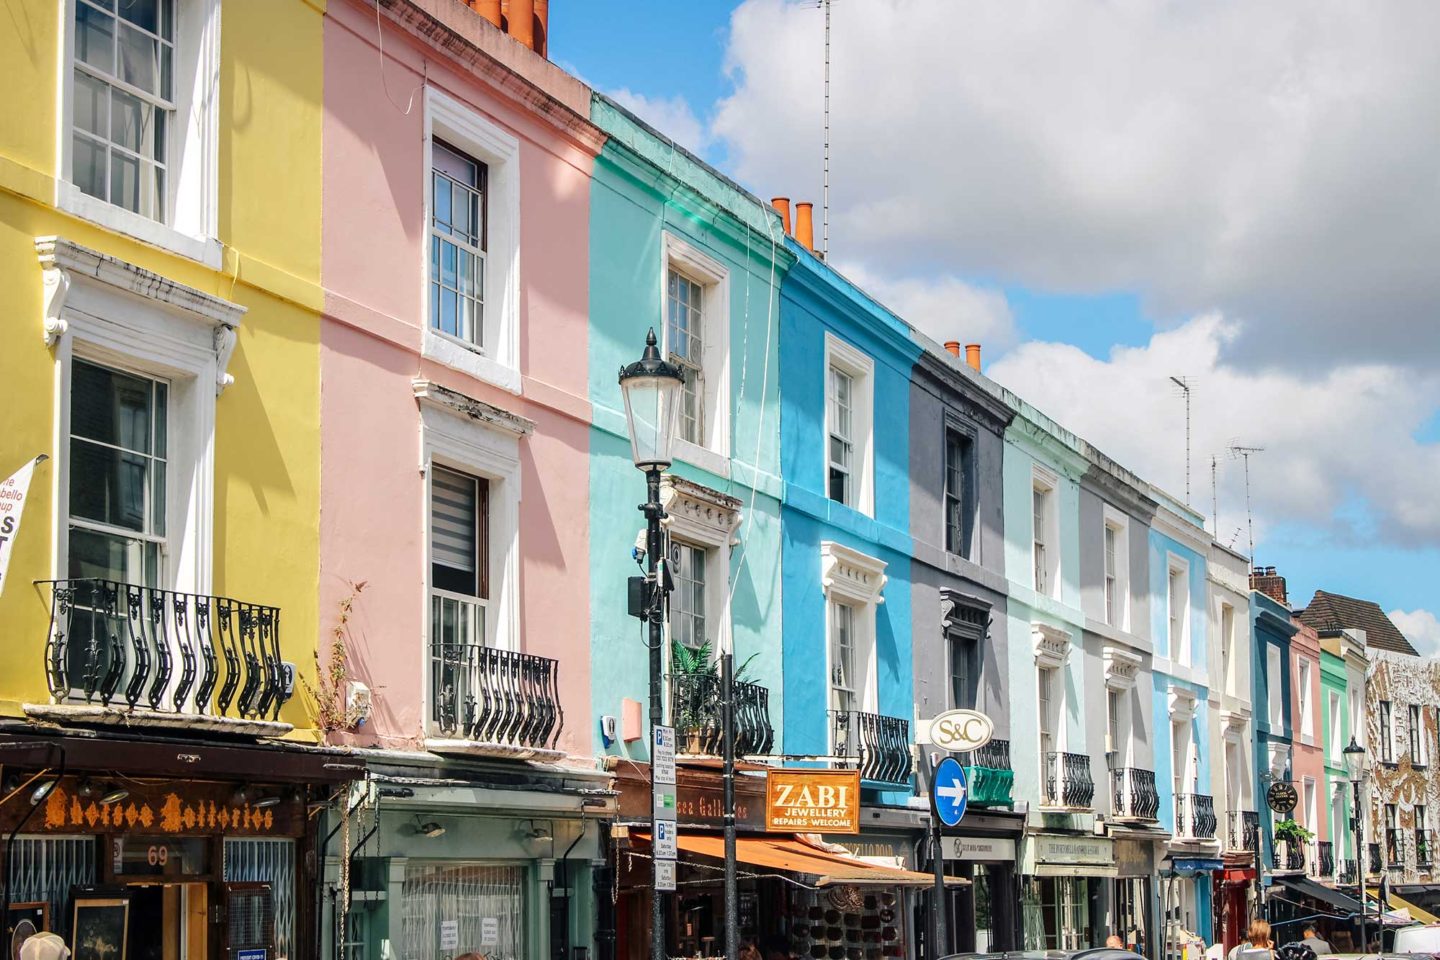 23 Things to do in Notting Hill, London - by a local (2023) - CK Travels